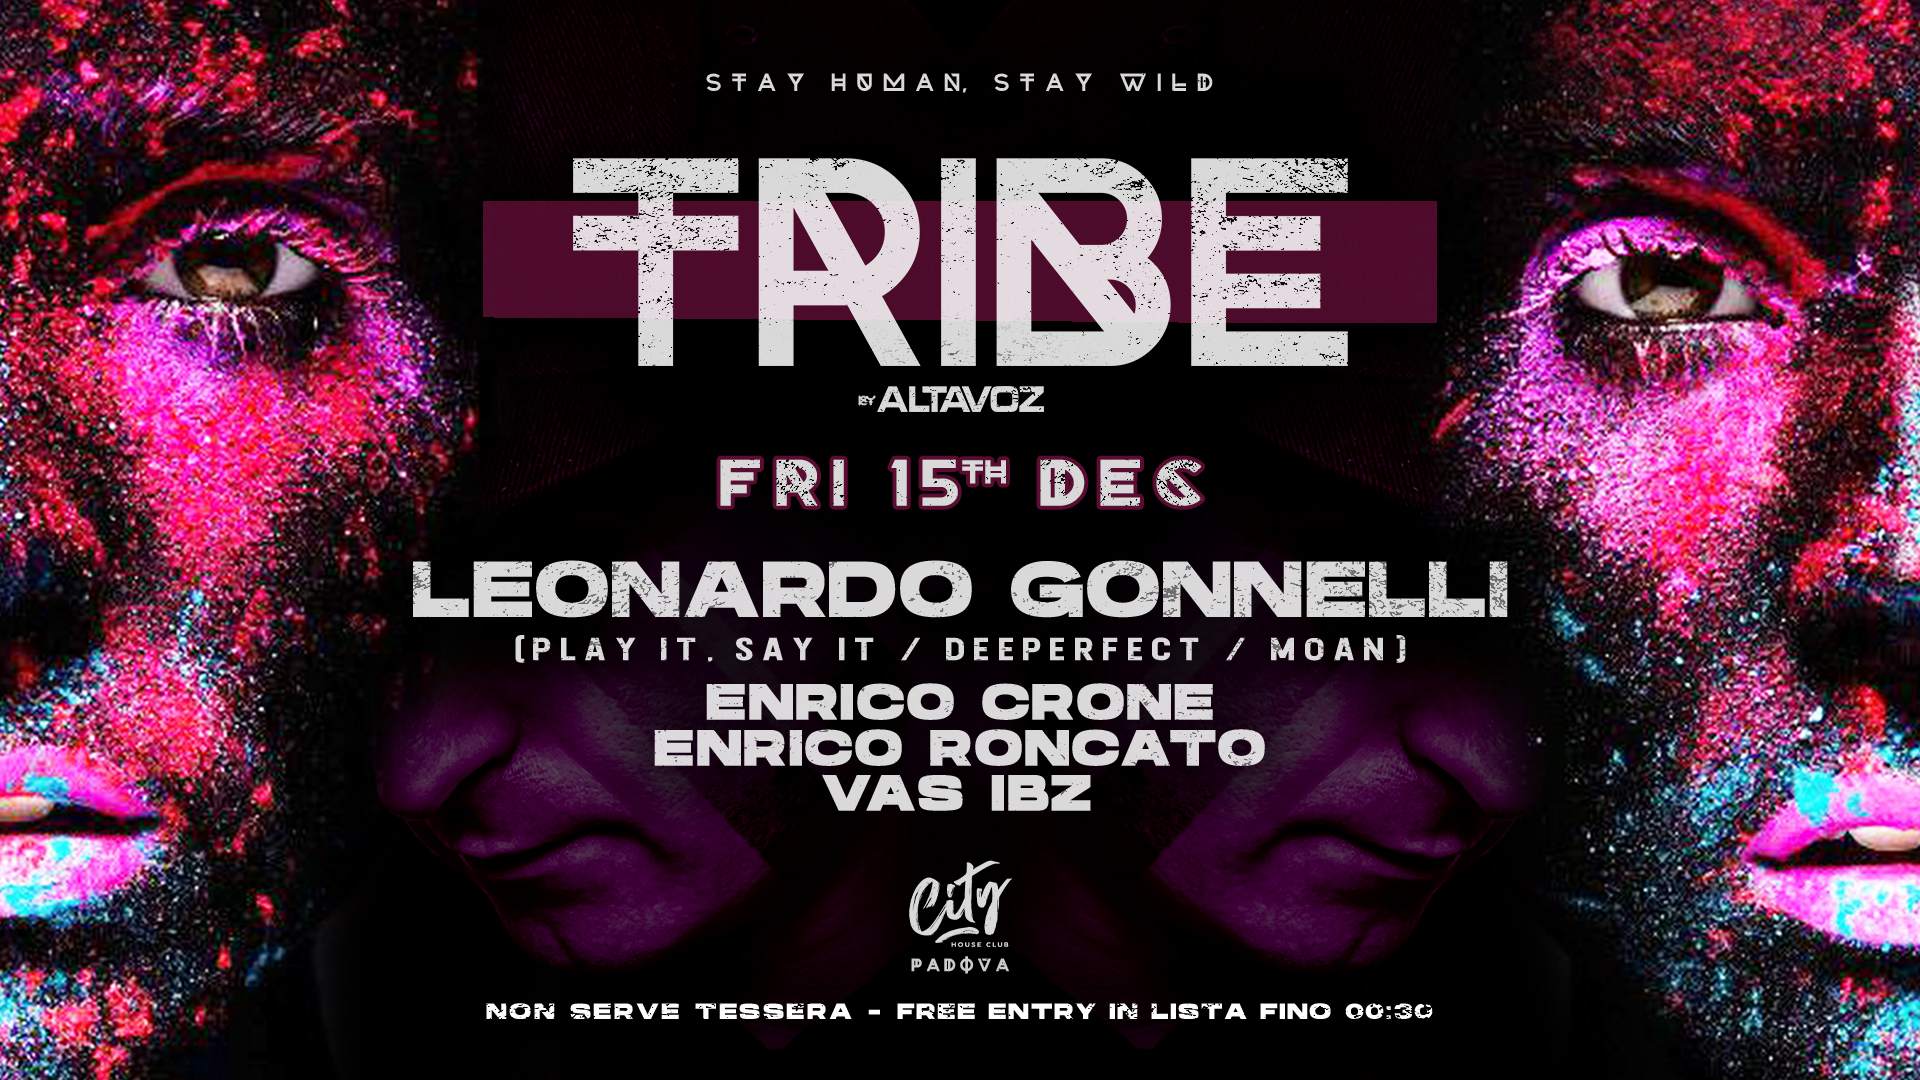 TRIBE by AltaVoz with Leonardo Gonnelli (Free Entry in List within 00:30) - フライヤー表